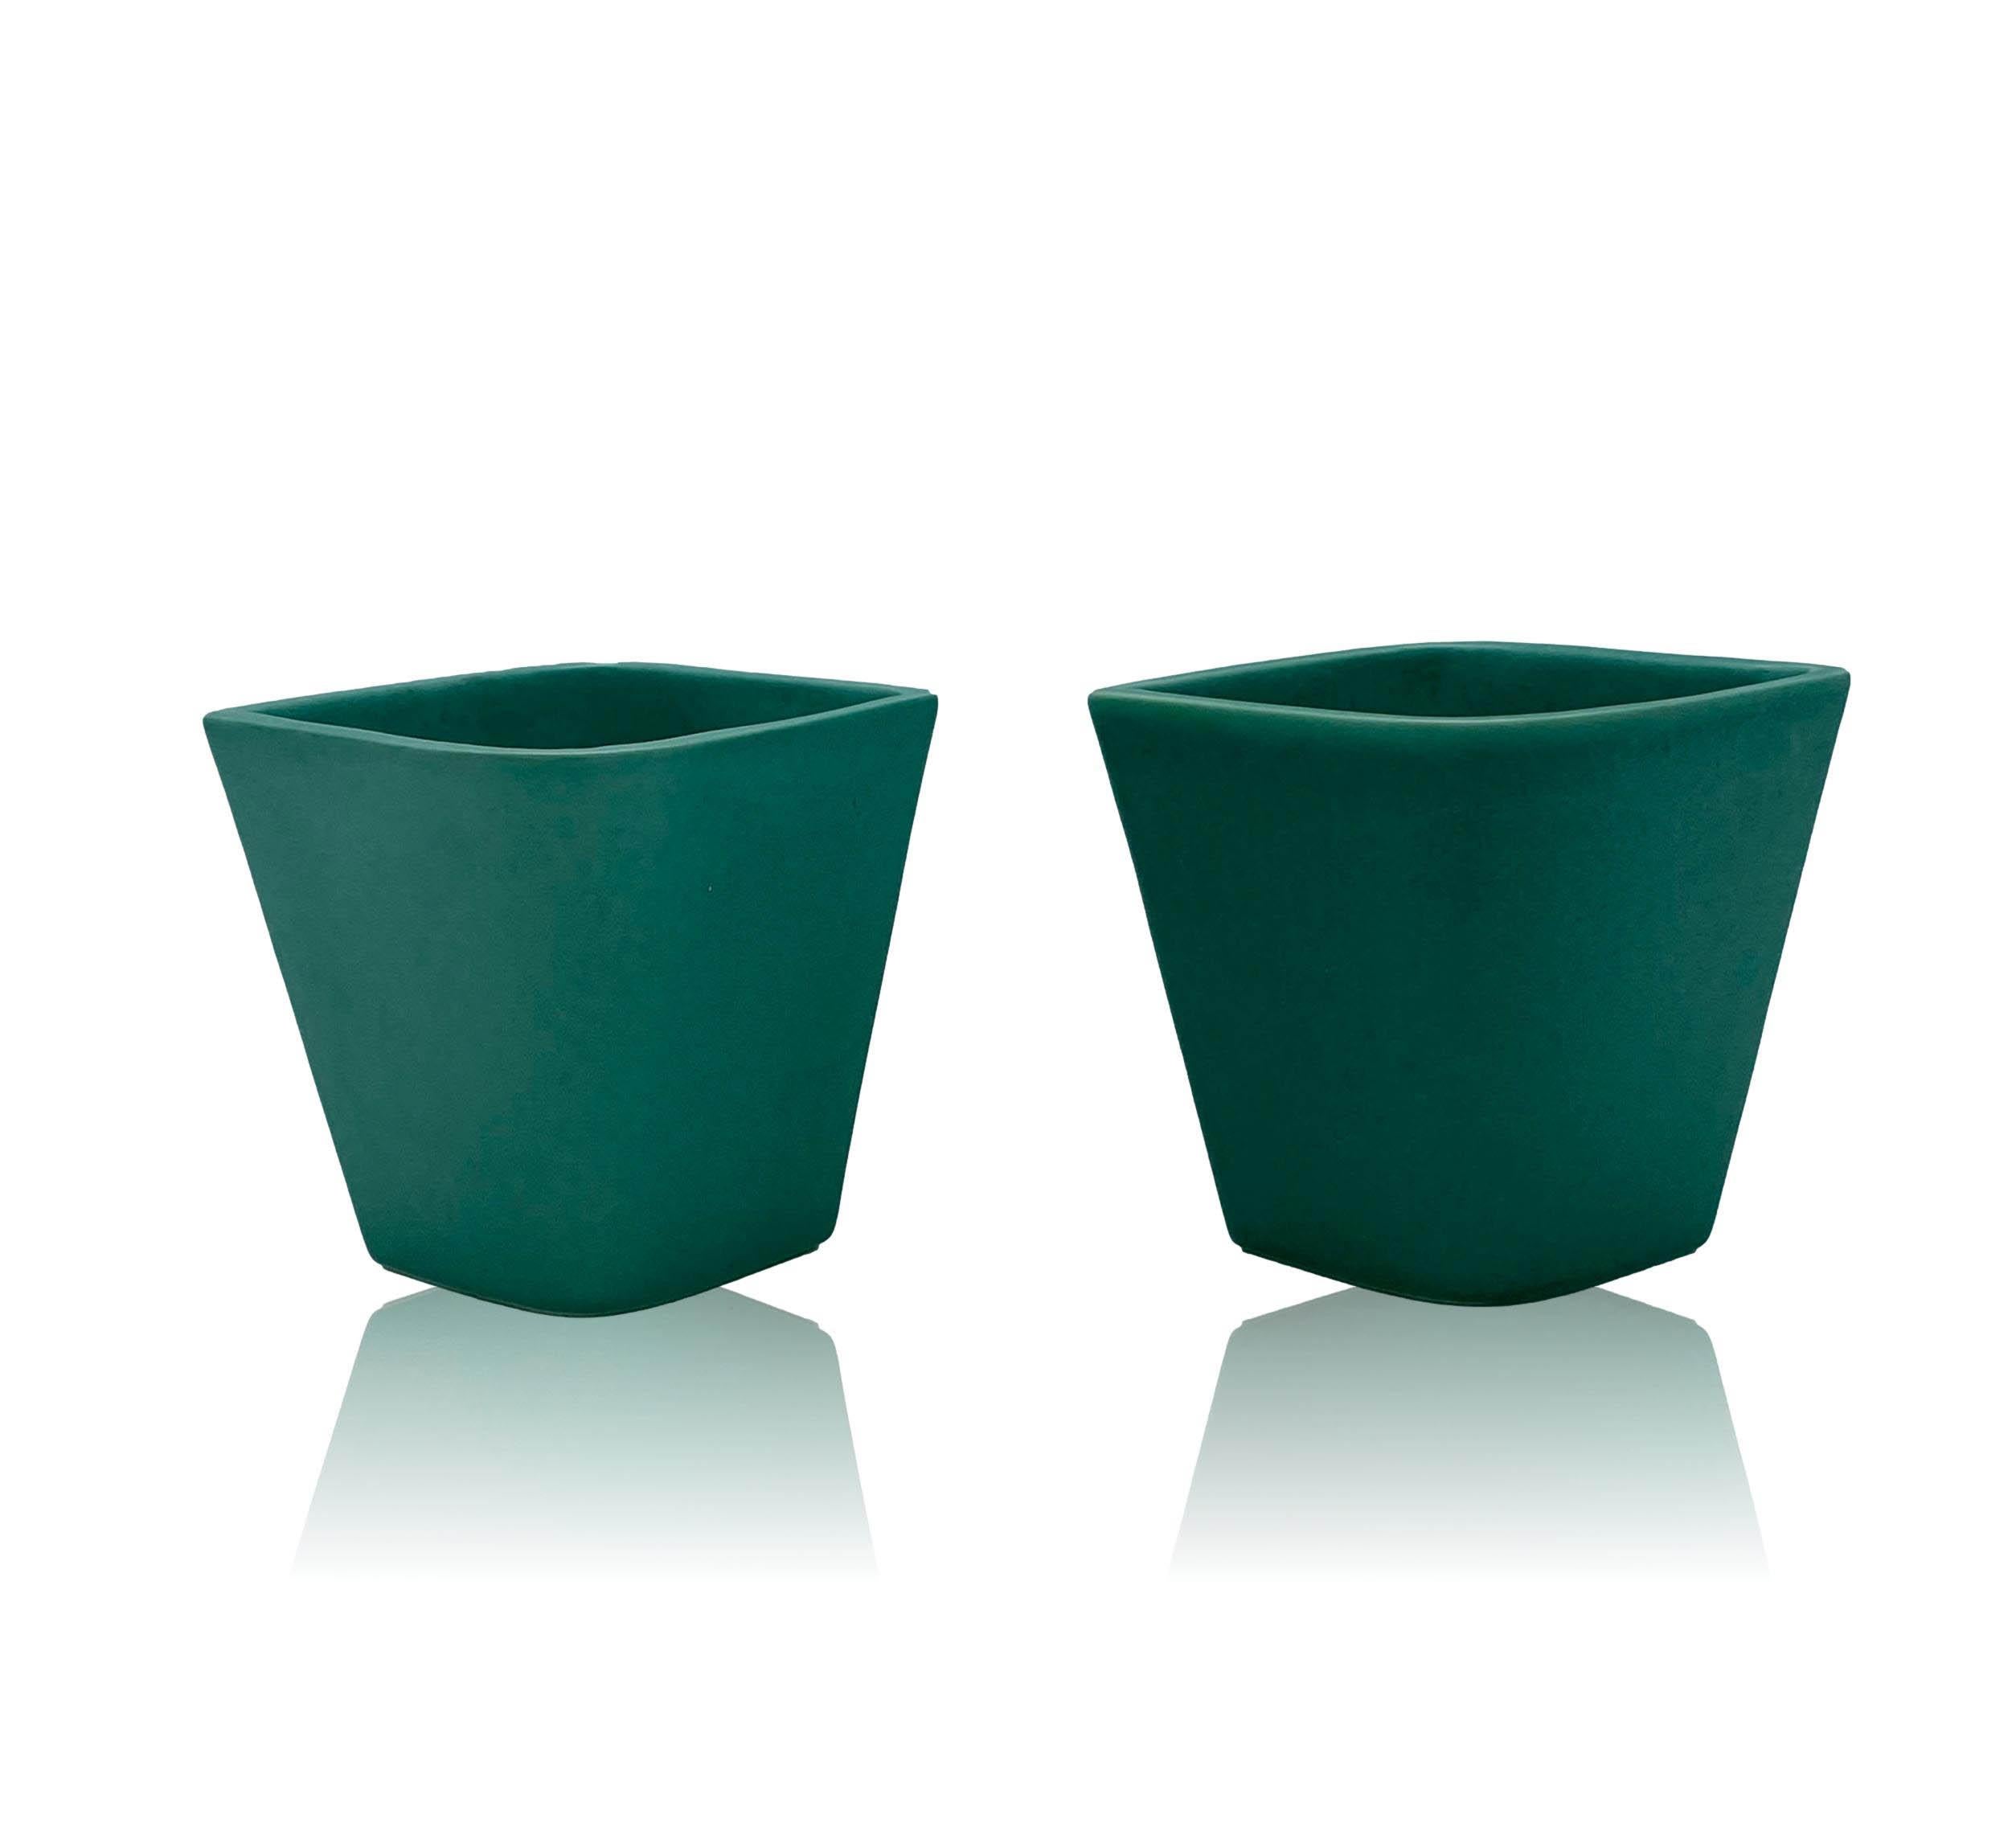 Gio Ponti for Richard Ginori - San Cristoforo, Pair of little vases, 1930s.
Green ceramic, Richard Ginori brand under the base - Made in Italy and numbers in black.